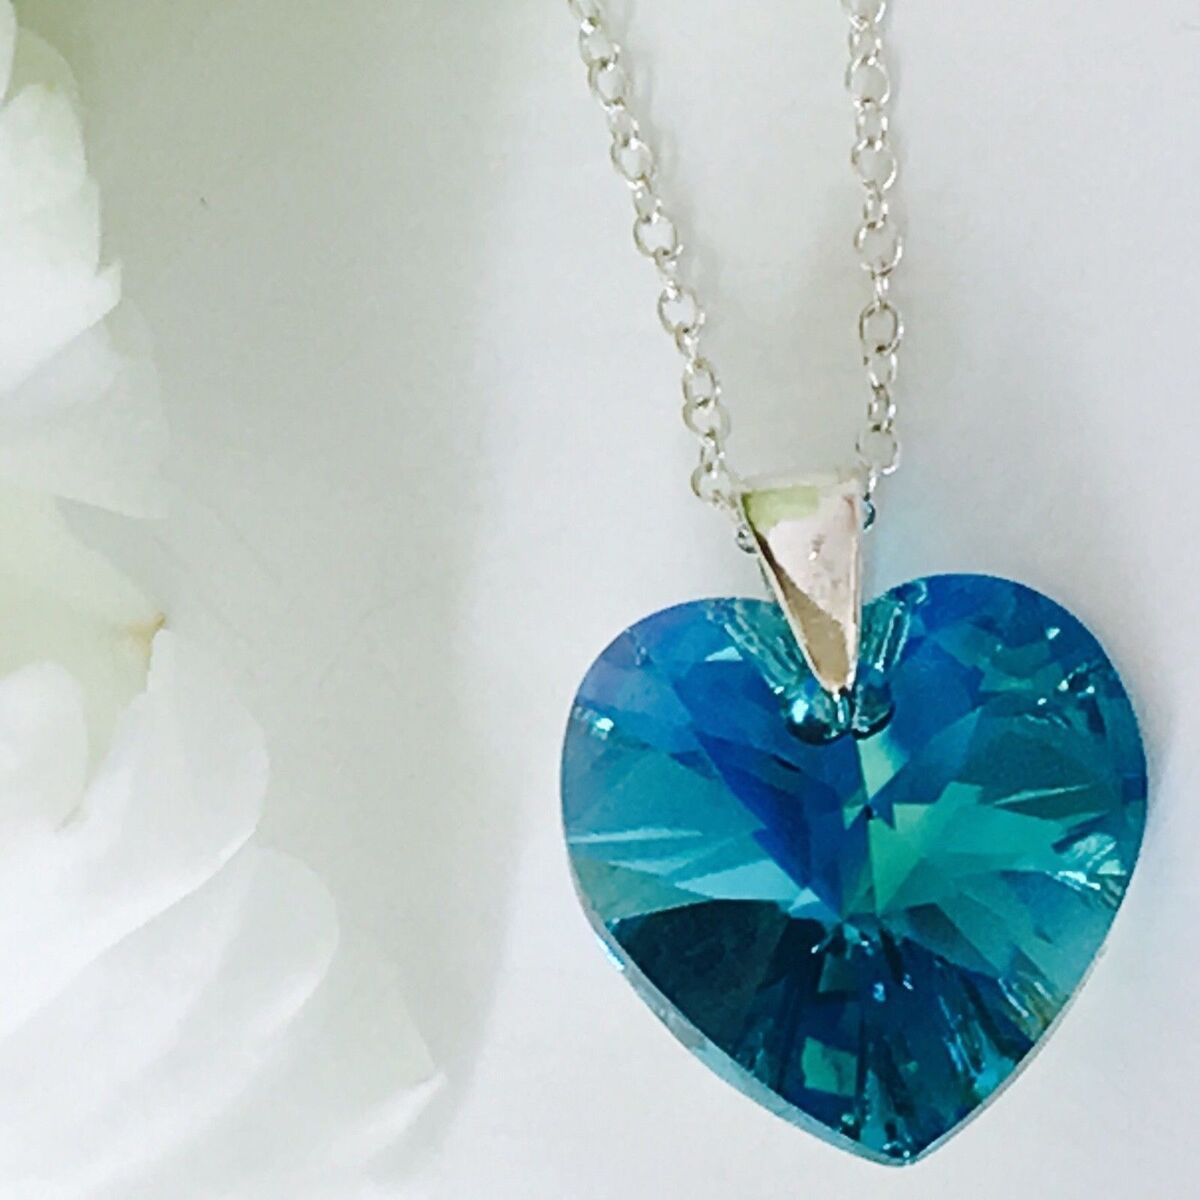 Buy Blue Heart . Swarovski Crystal Necklace . Pendant Necklace . Sterling  Silver . Gift for Girlfriend . Swarovski Jewelry Online in India - Etsy